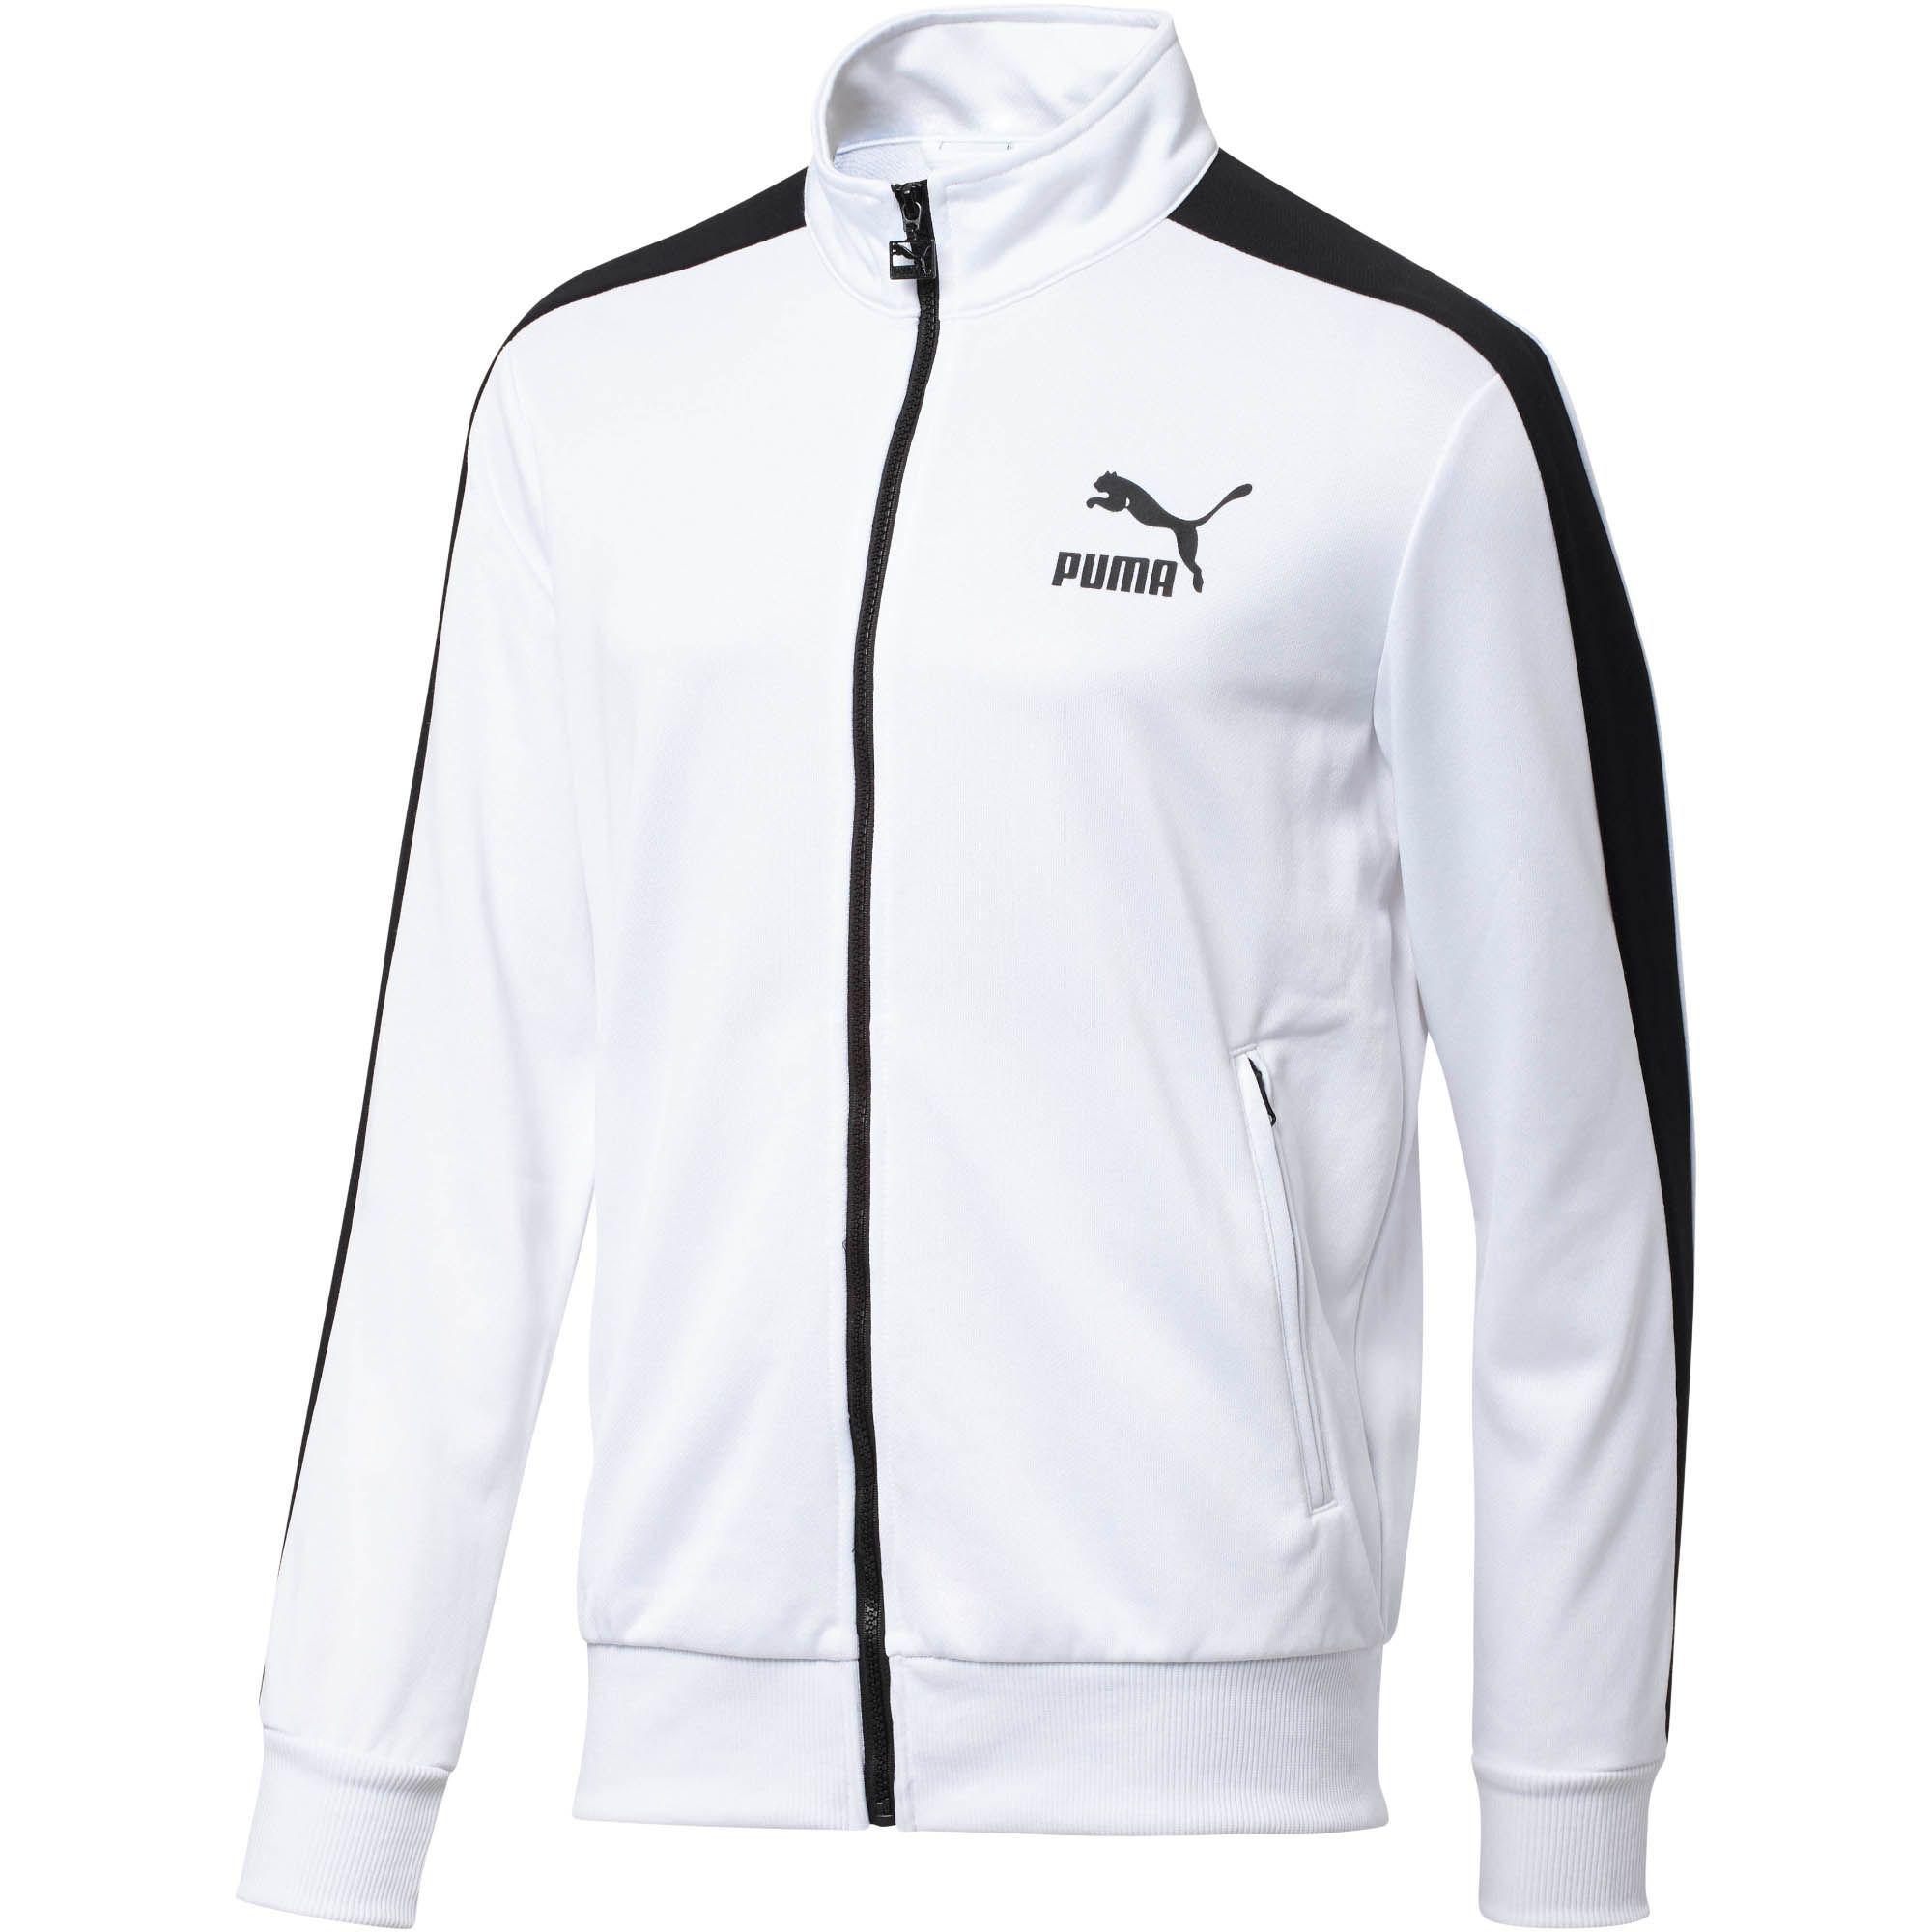 PUMA Synthetic Archive T7 Track Jacket in White for Men - Lyst